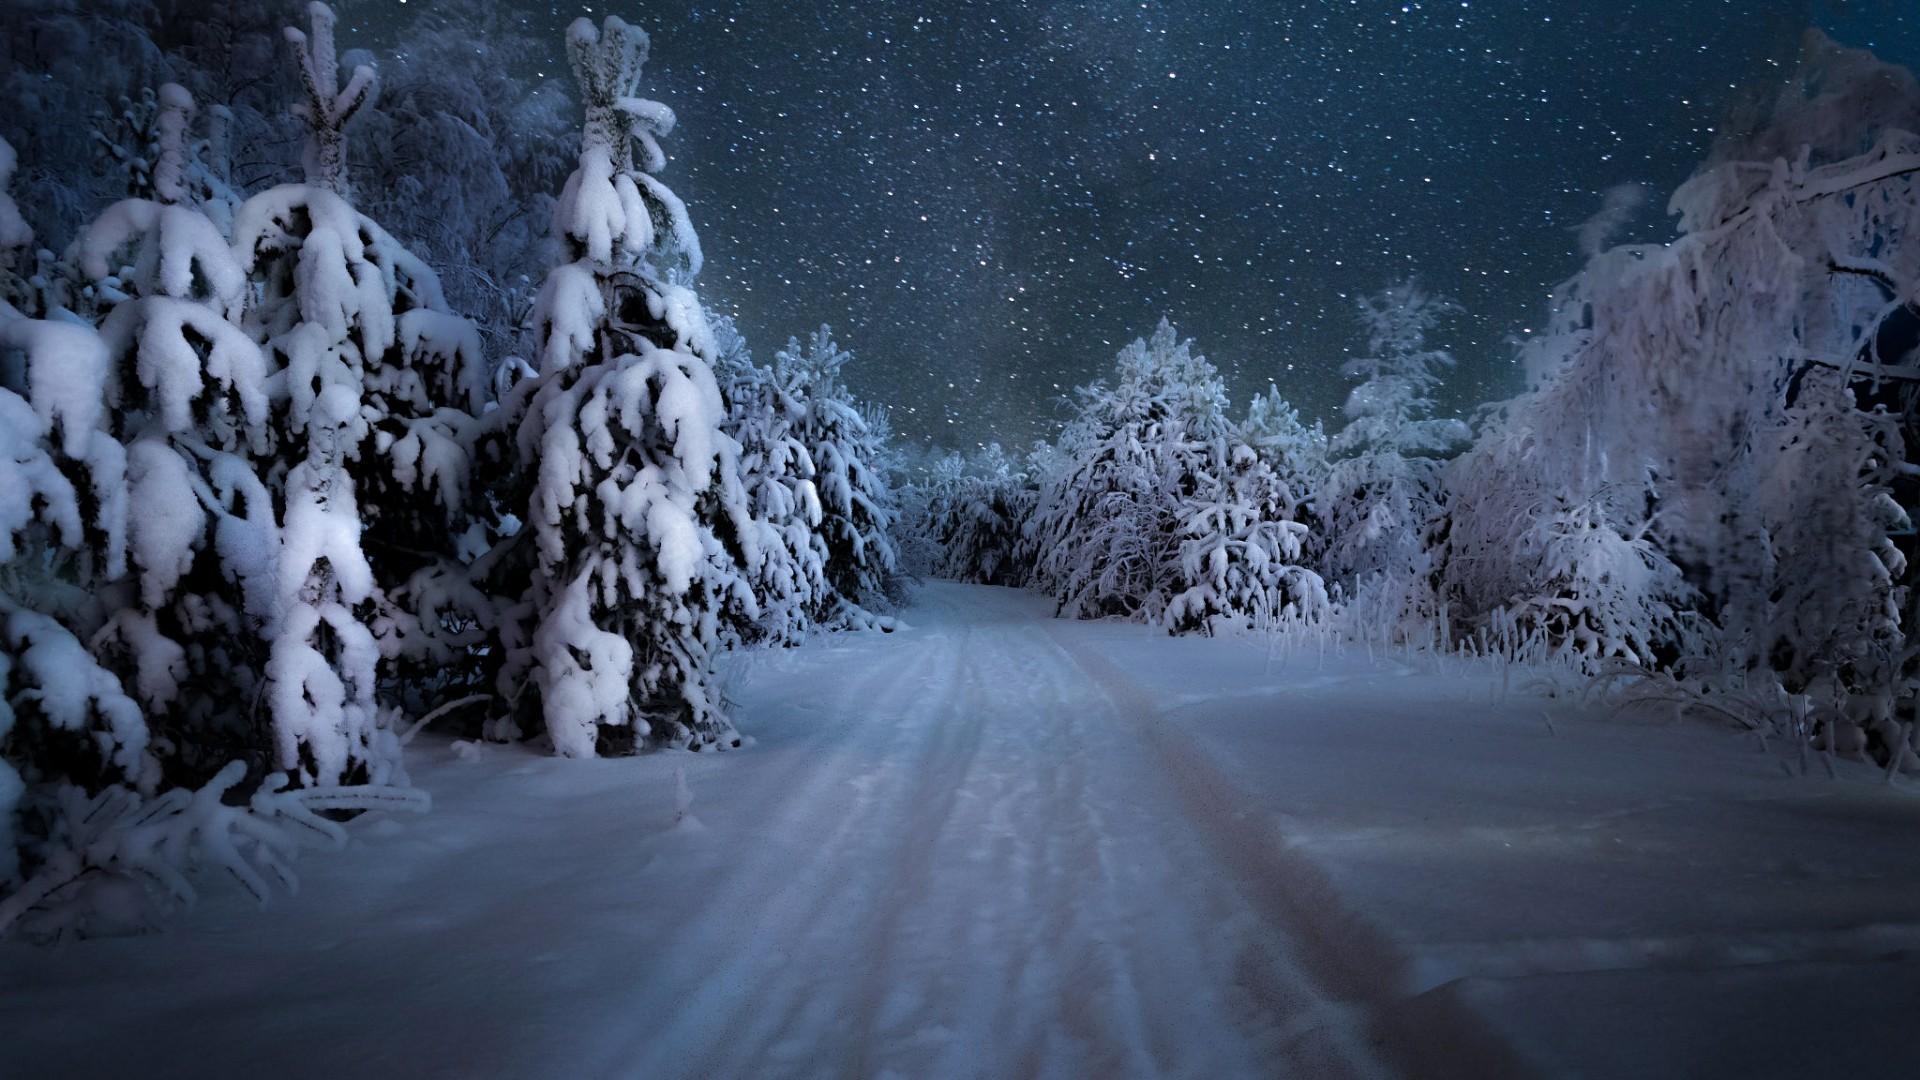 snowy forest path at night